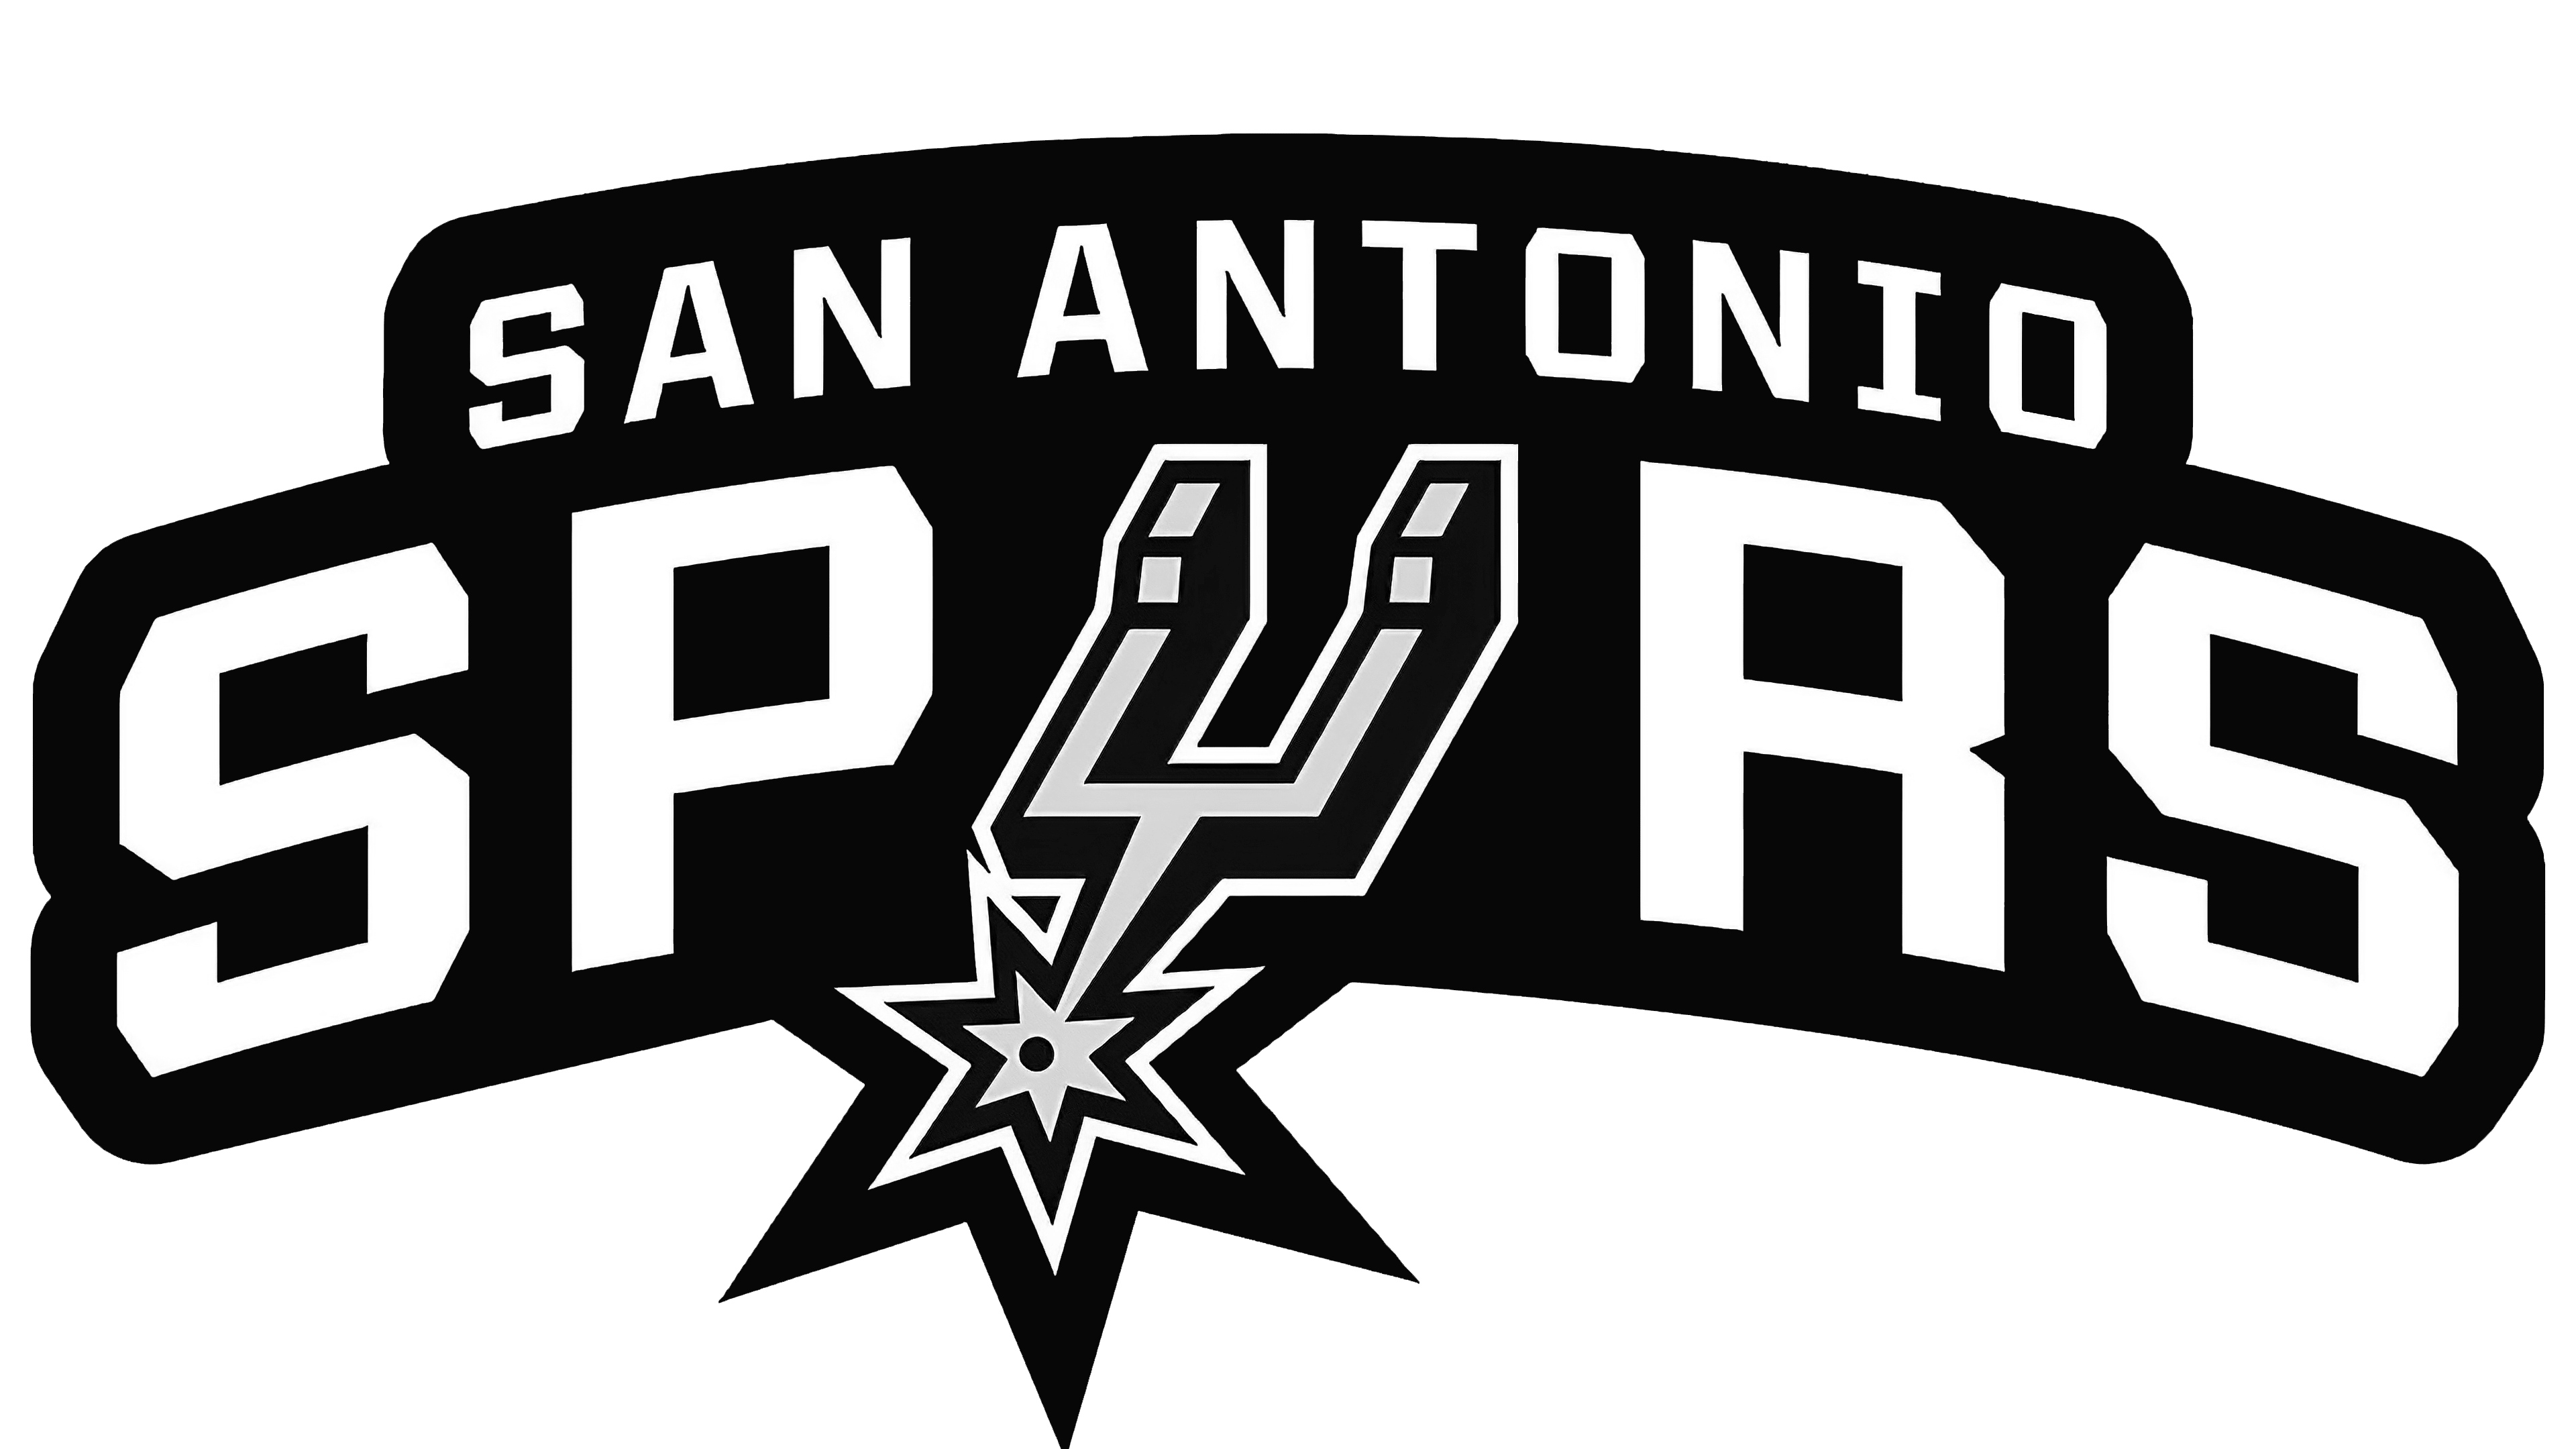 Since 1974, the san antonio spurs logo has been based on one and the same v...